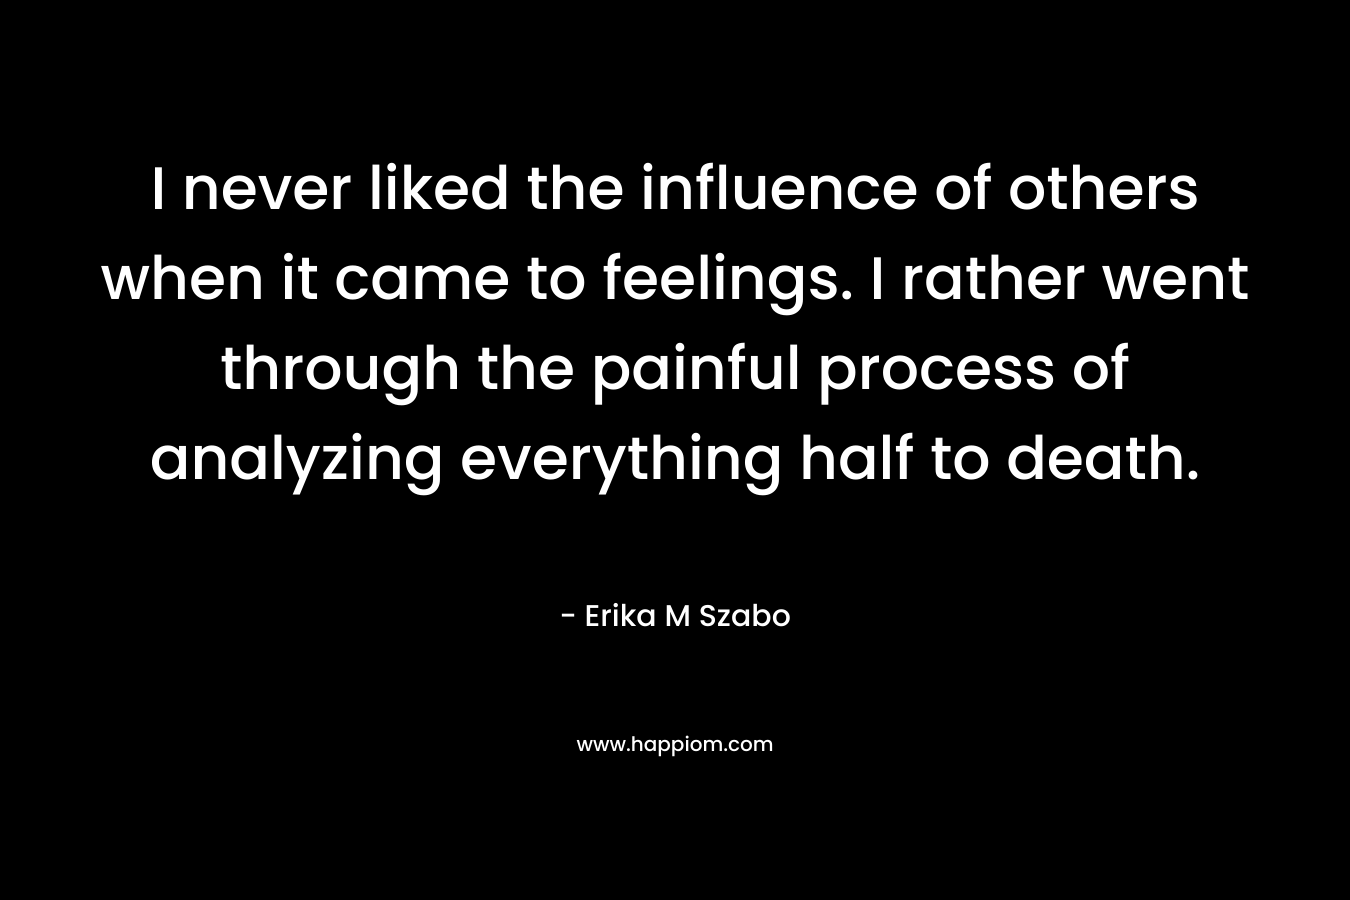 I never liked the influence of others when it came to feelings. I rather went through the painful process of analyzing everything half to death. – Erika M Szabo